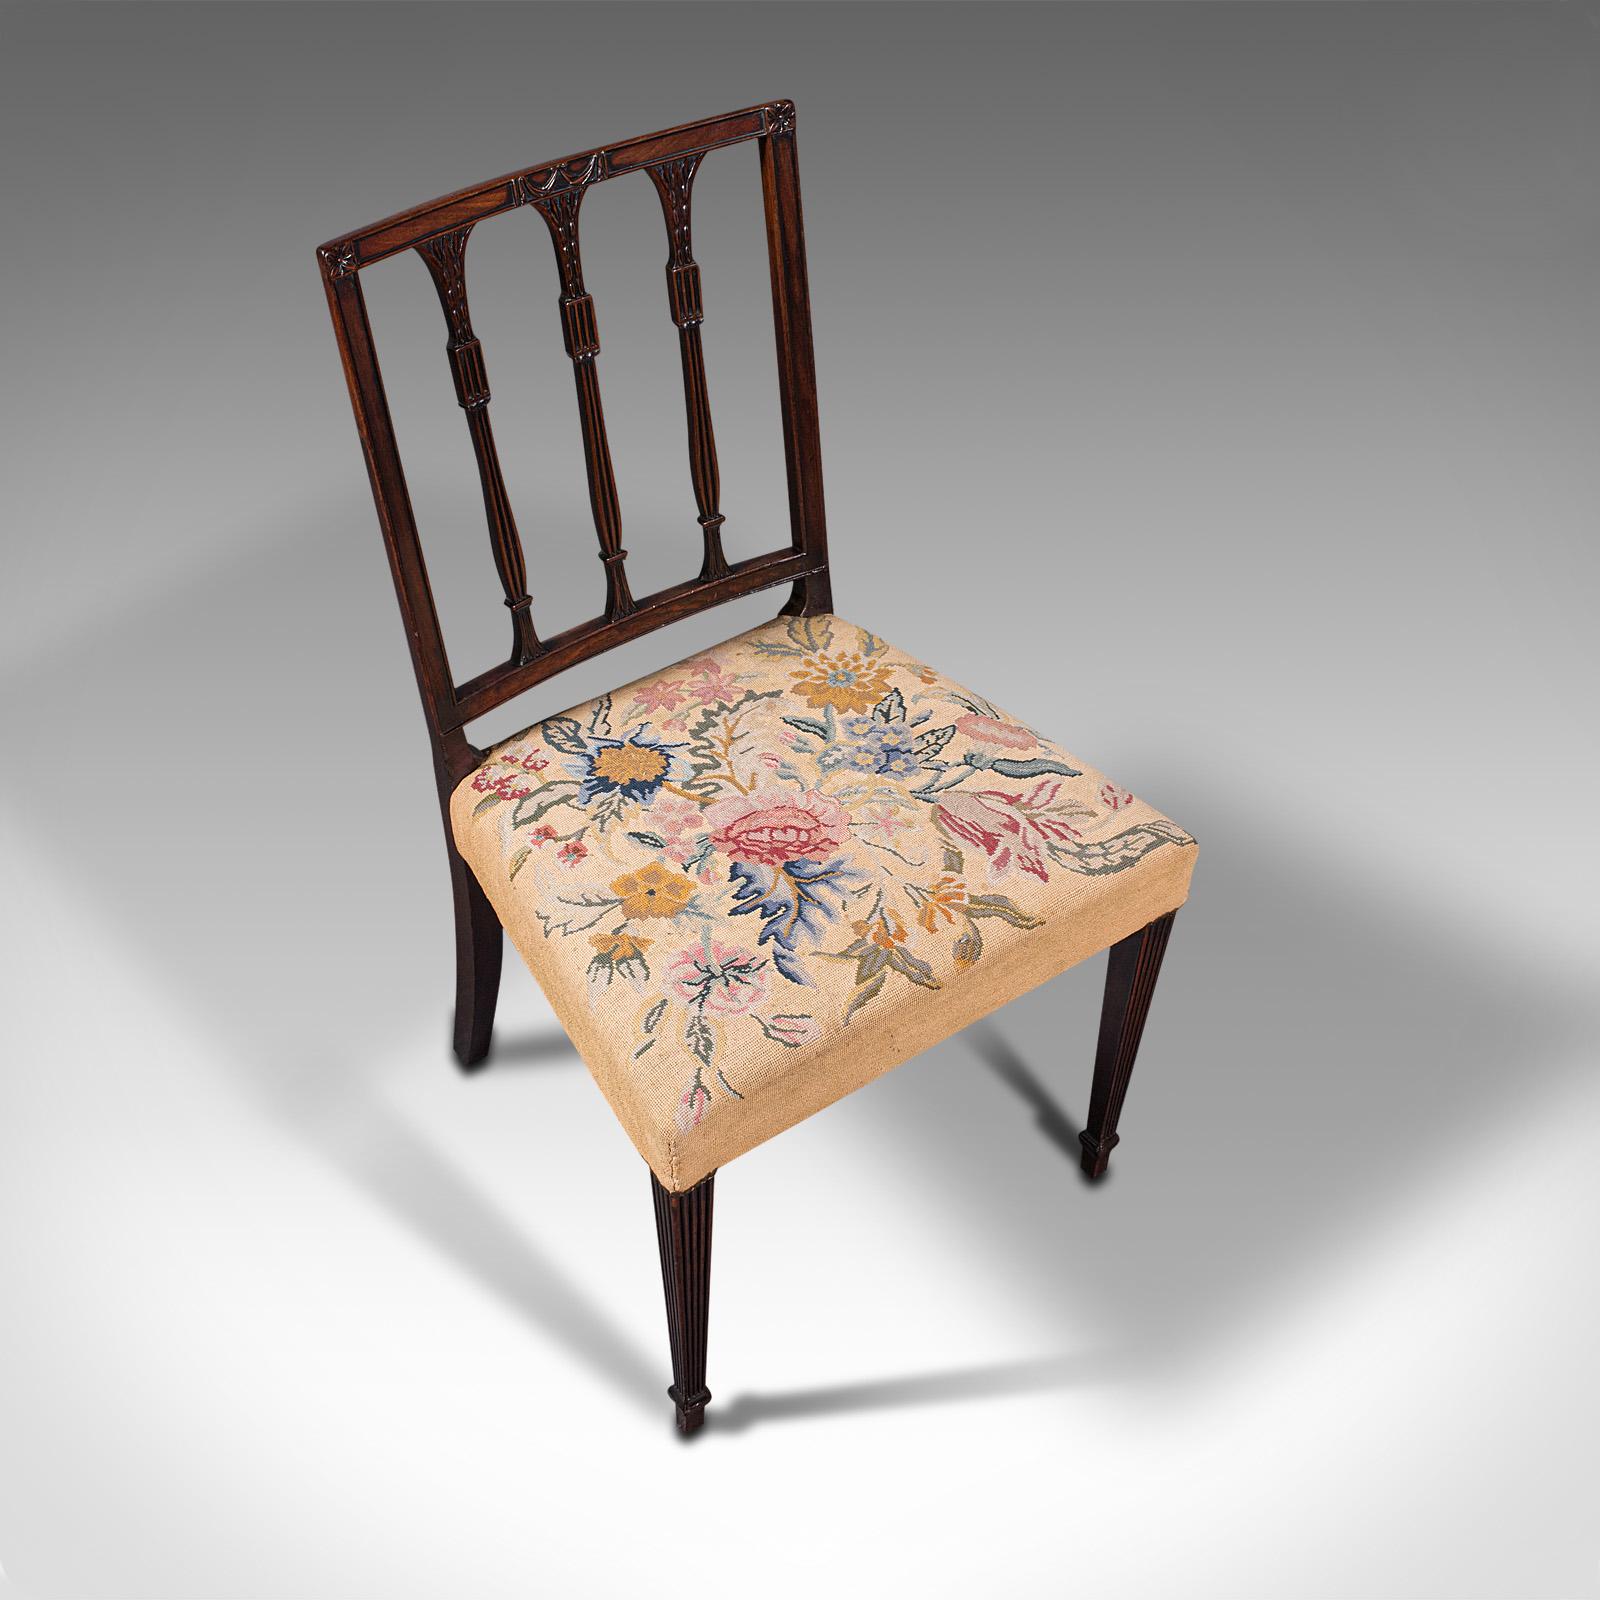 Set of 4 Antique Embroidered Chairs, English, Dining Seat, After Sheraton, 1780 2